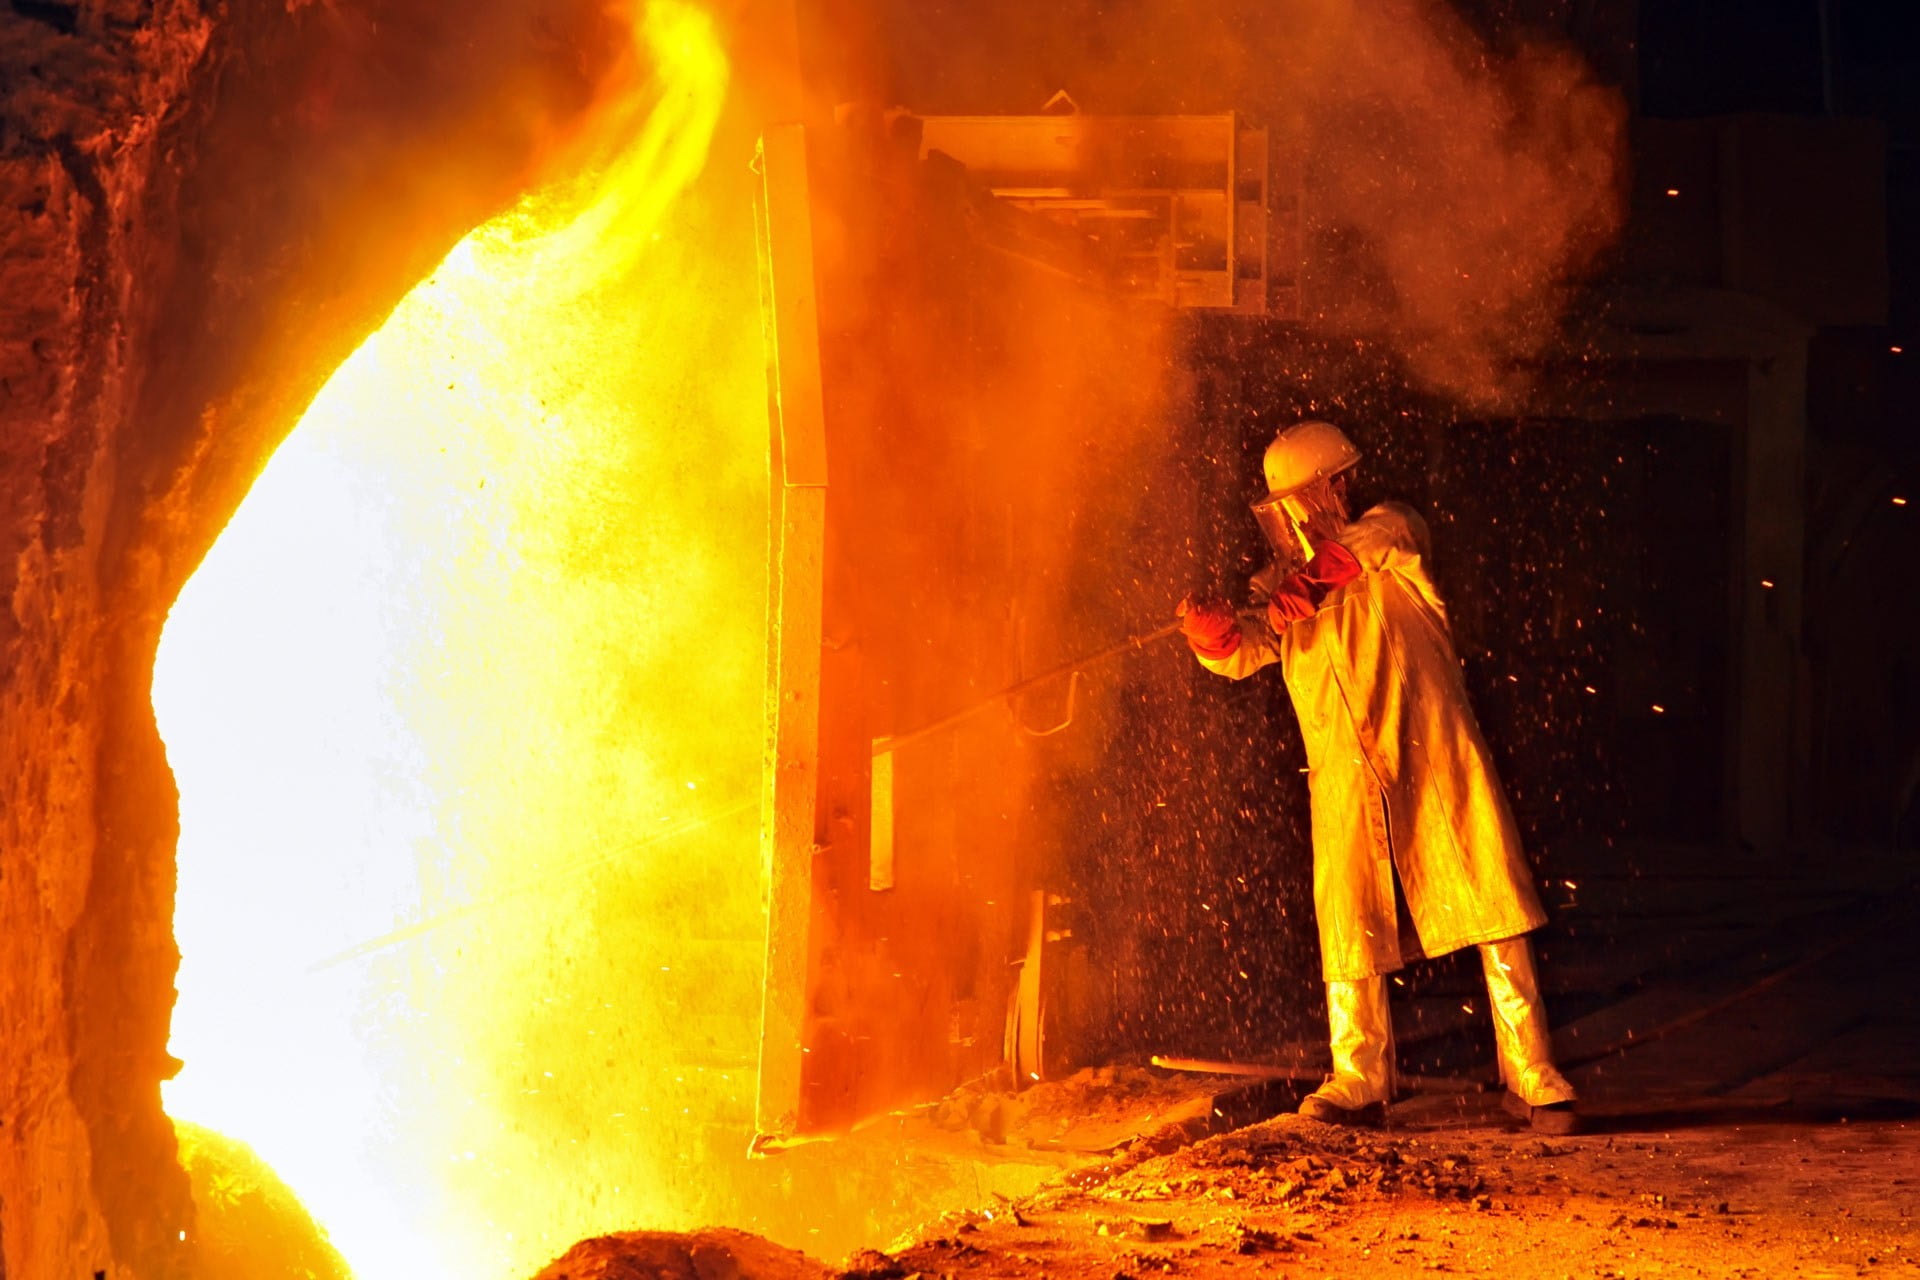 industrial, burning, fire, one person, fire - natural phenomenon